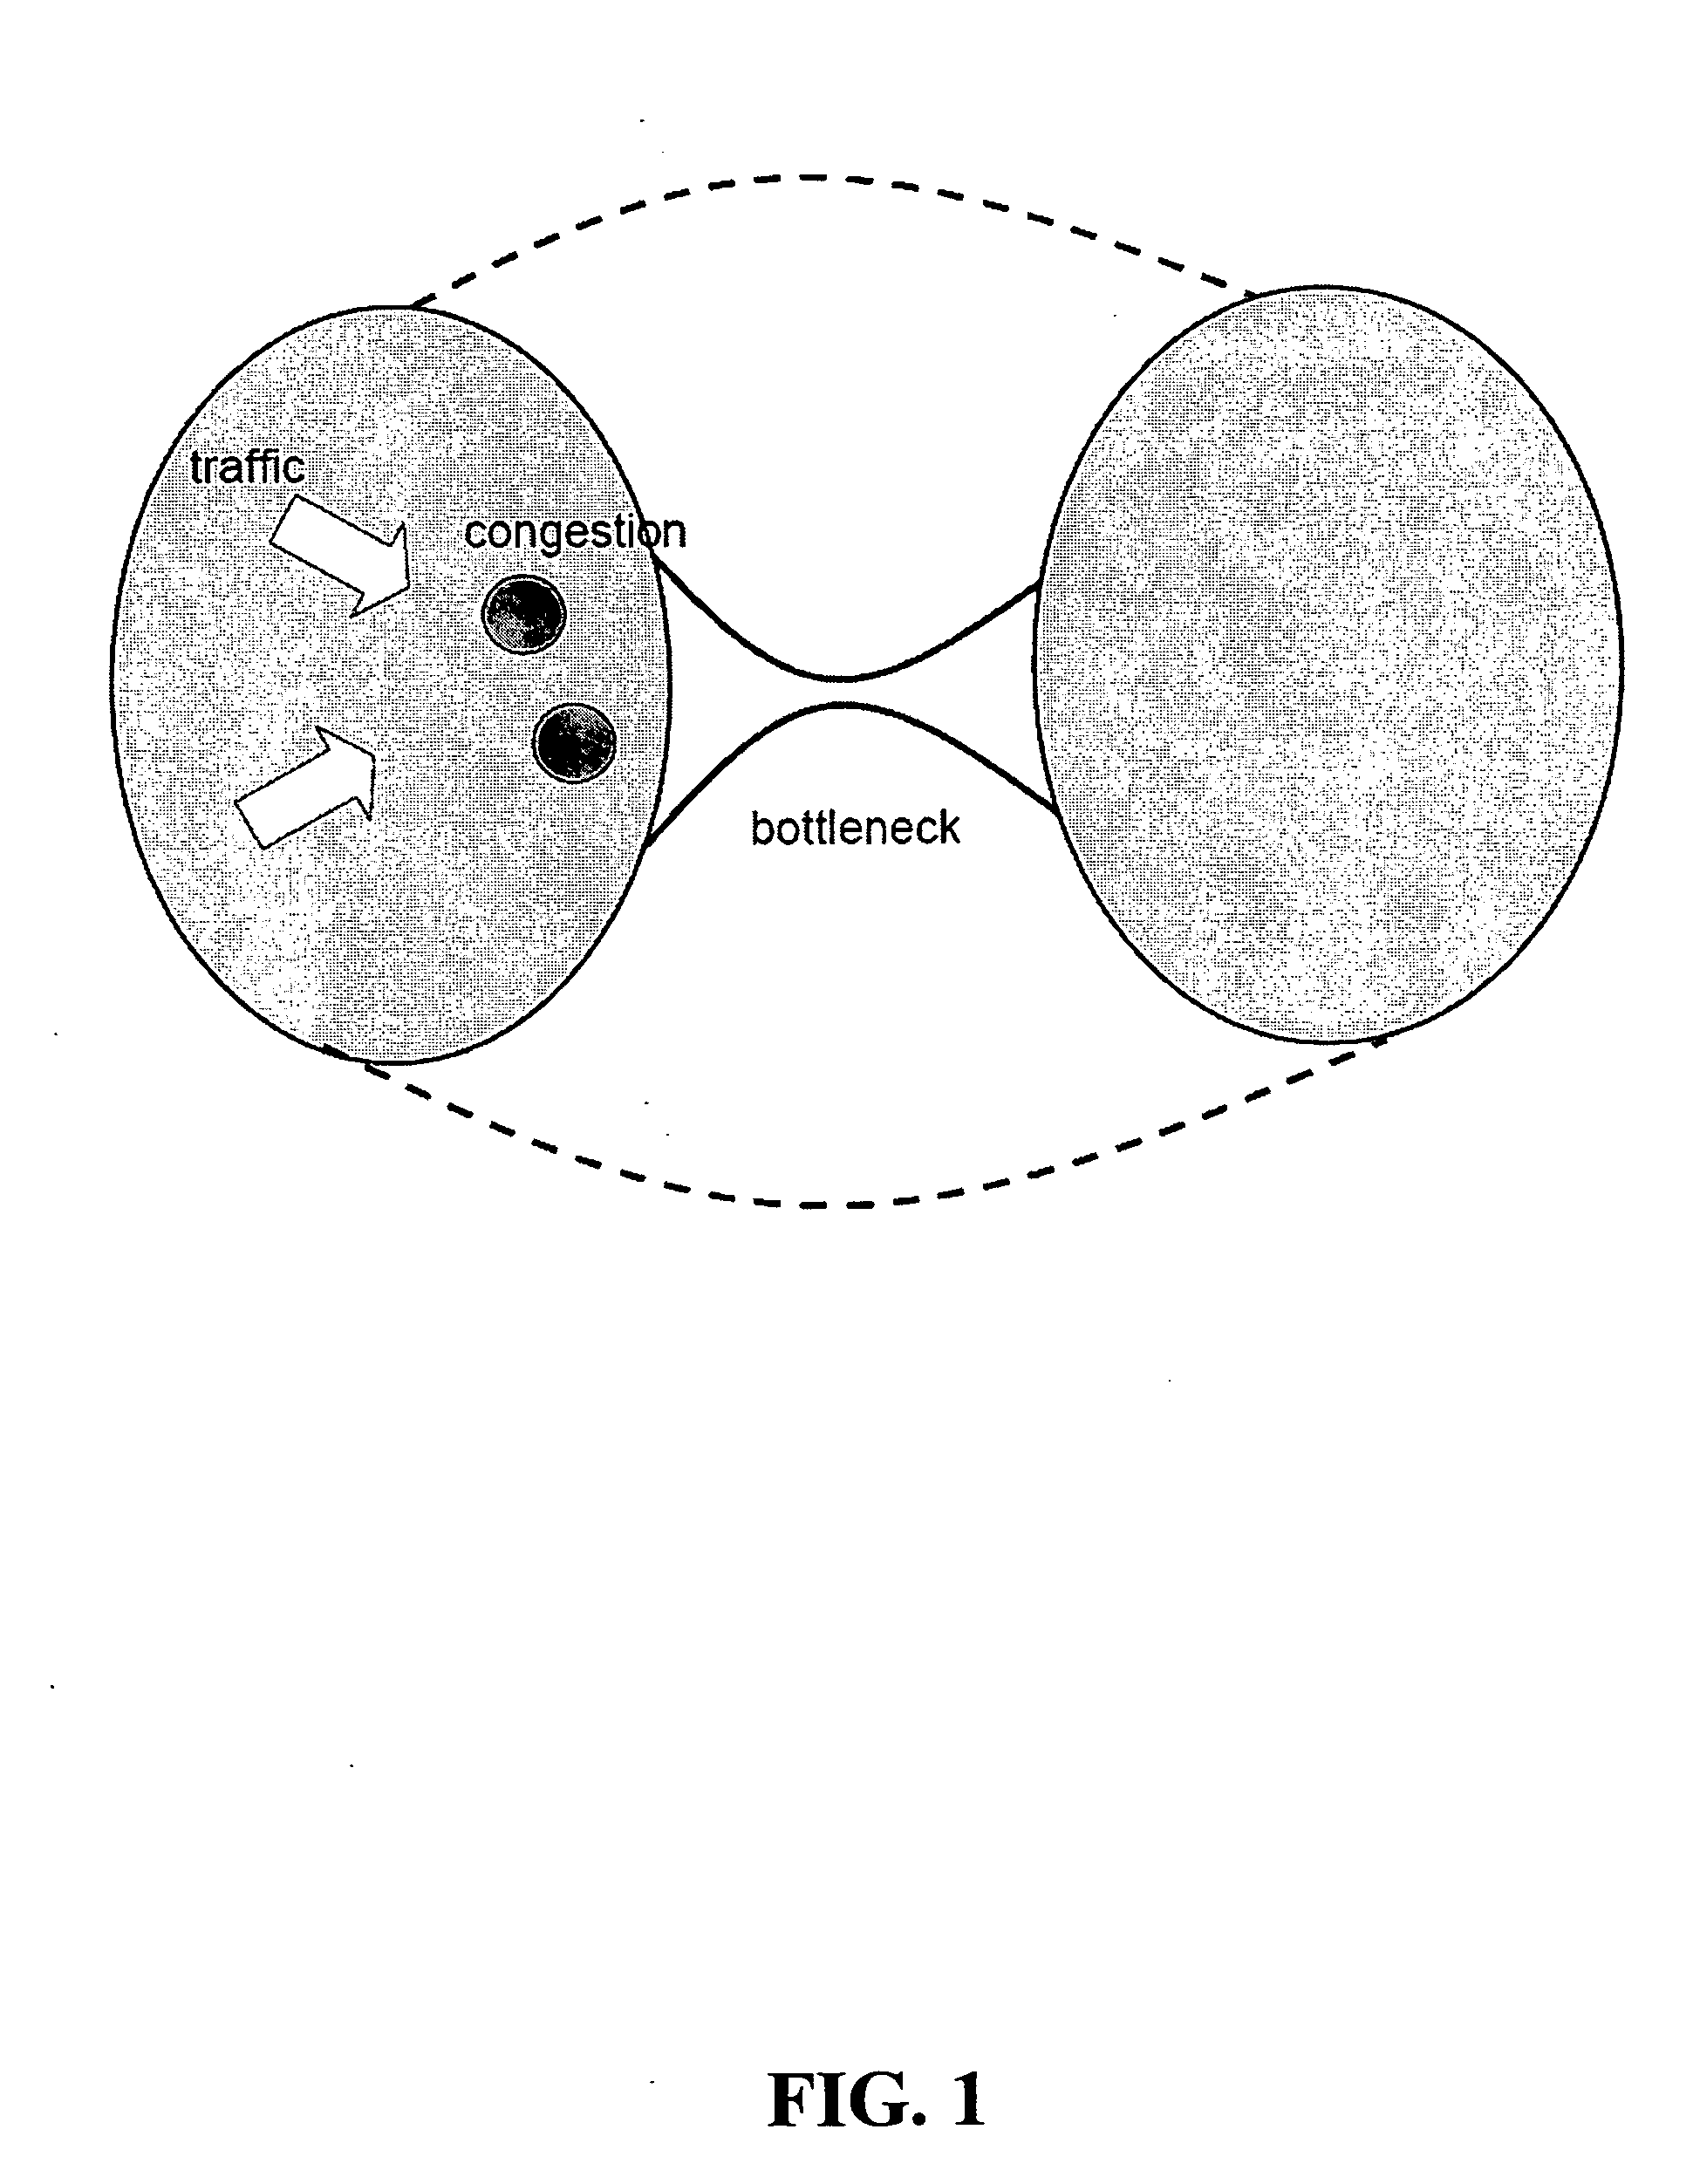 Method and apparatus for dynamically reducing end-to-end delay in multi-hop wireless networks in response to changing traffic conditions